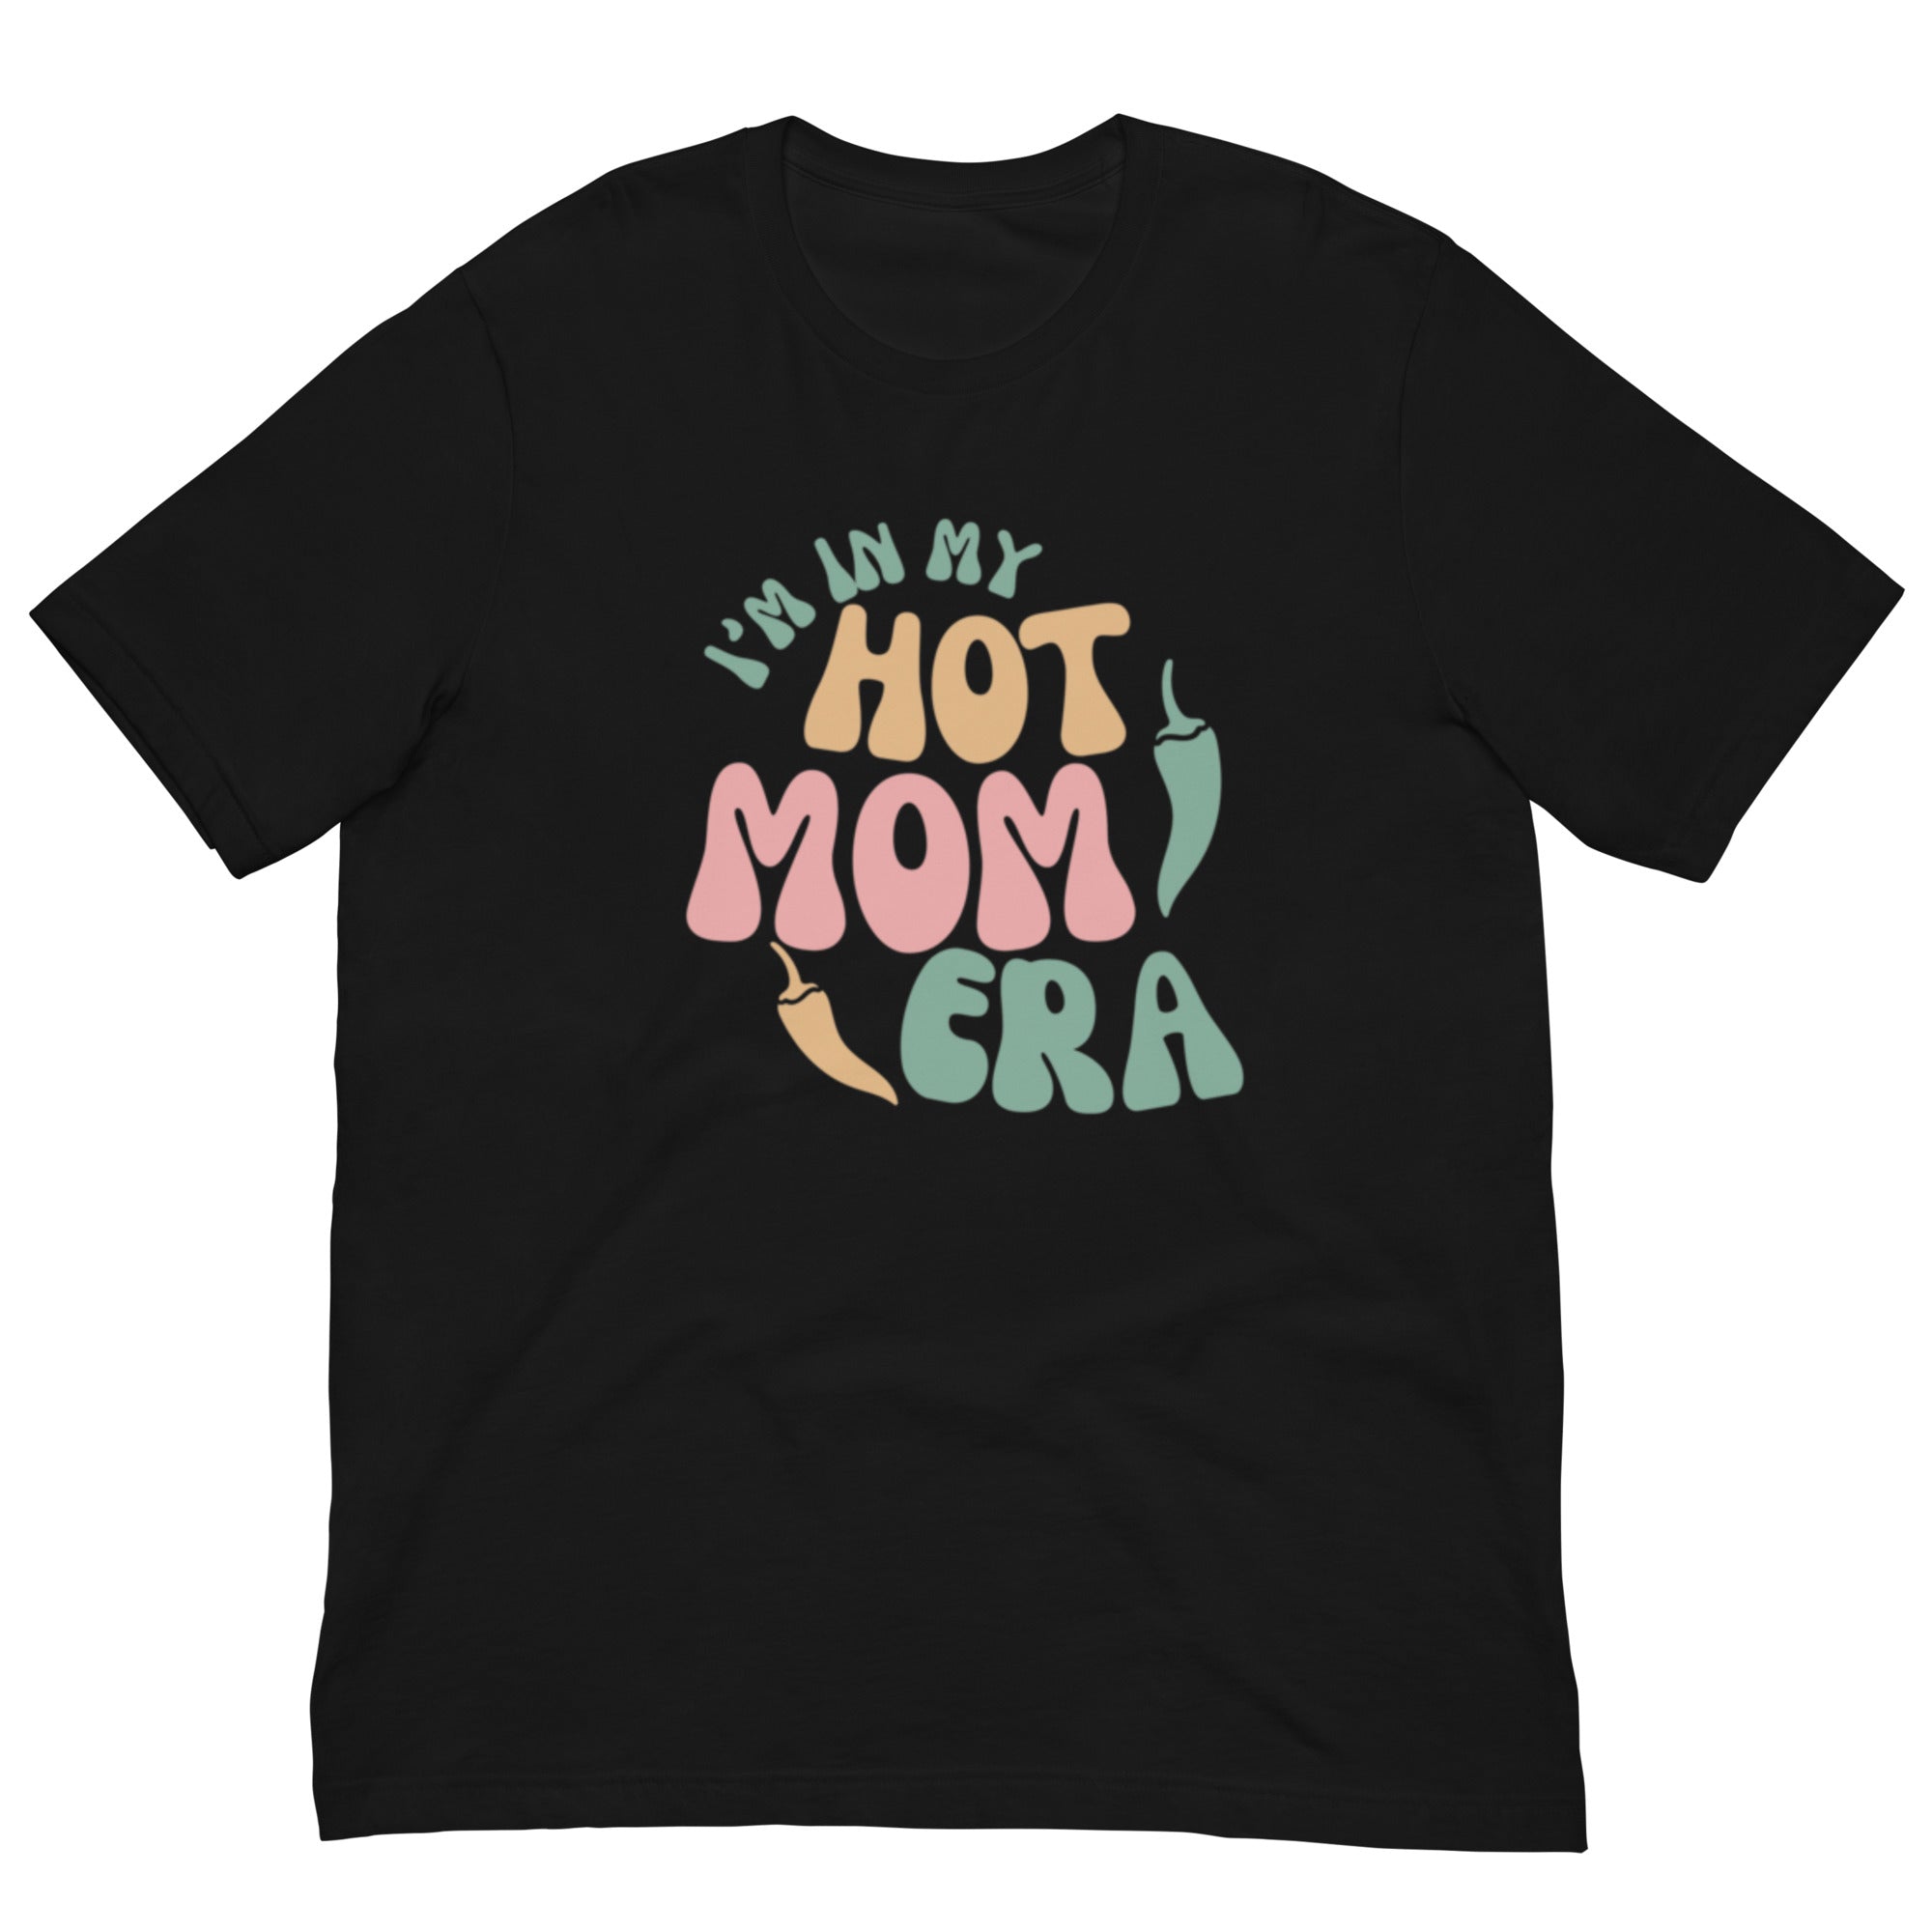 Black breathable Era Shirt with colorful text that reads "in my hot mom" in playful, bold lettering.